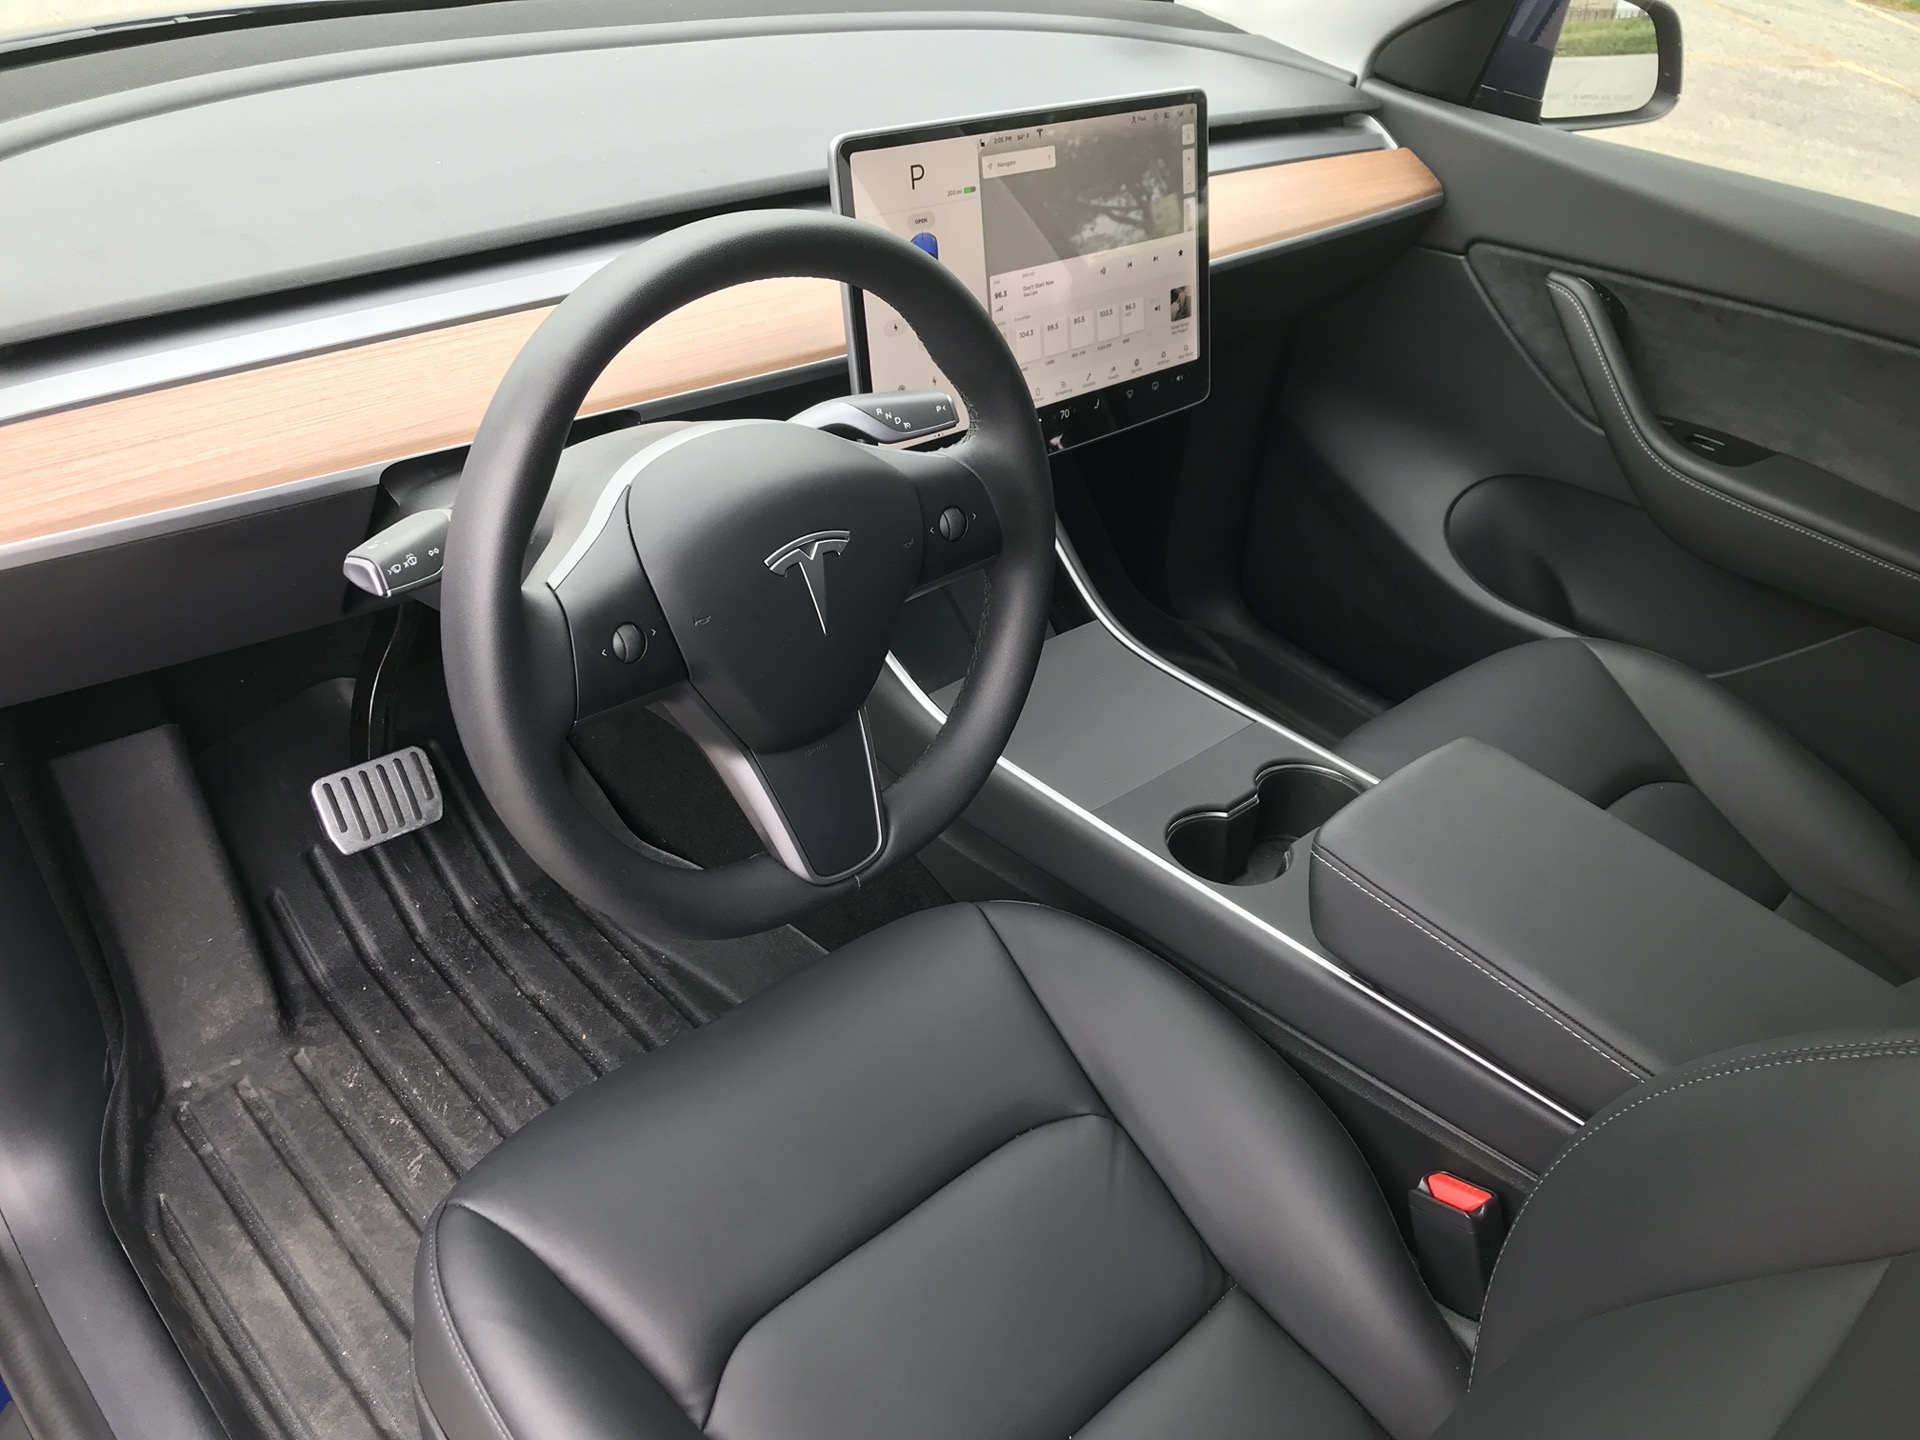 First Drive Review 2020 Tesla Model Y Rethinks The Automobile In Smart